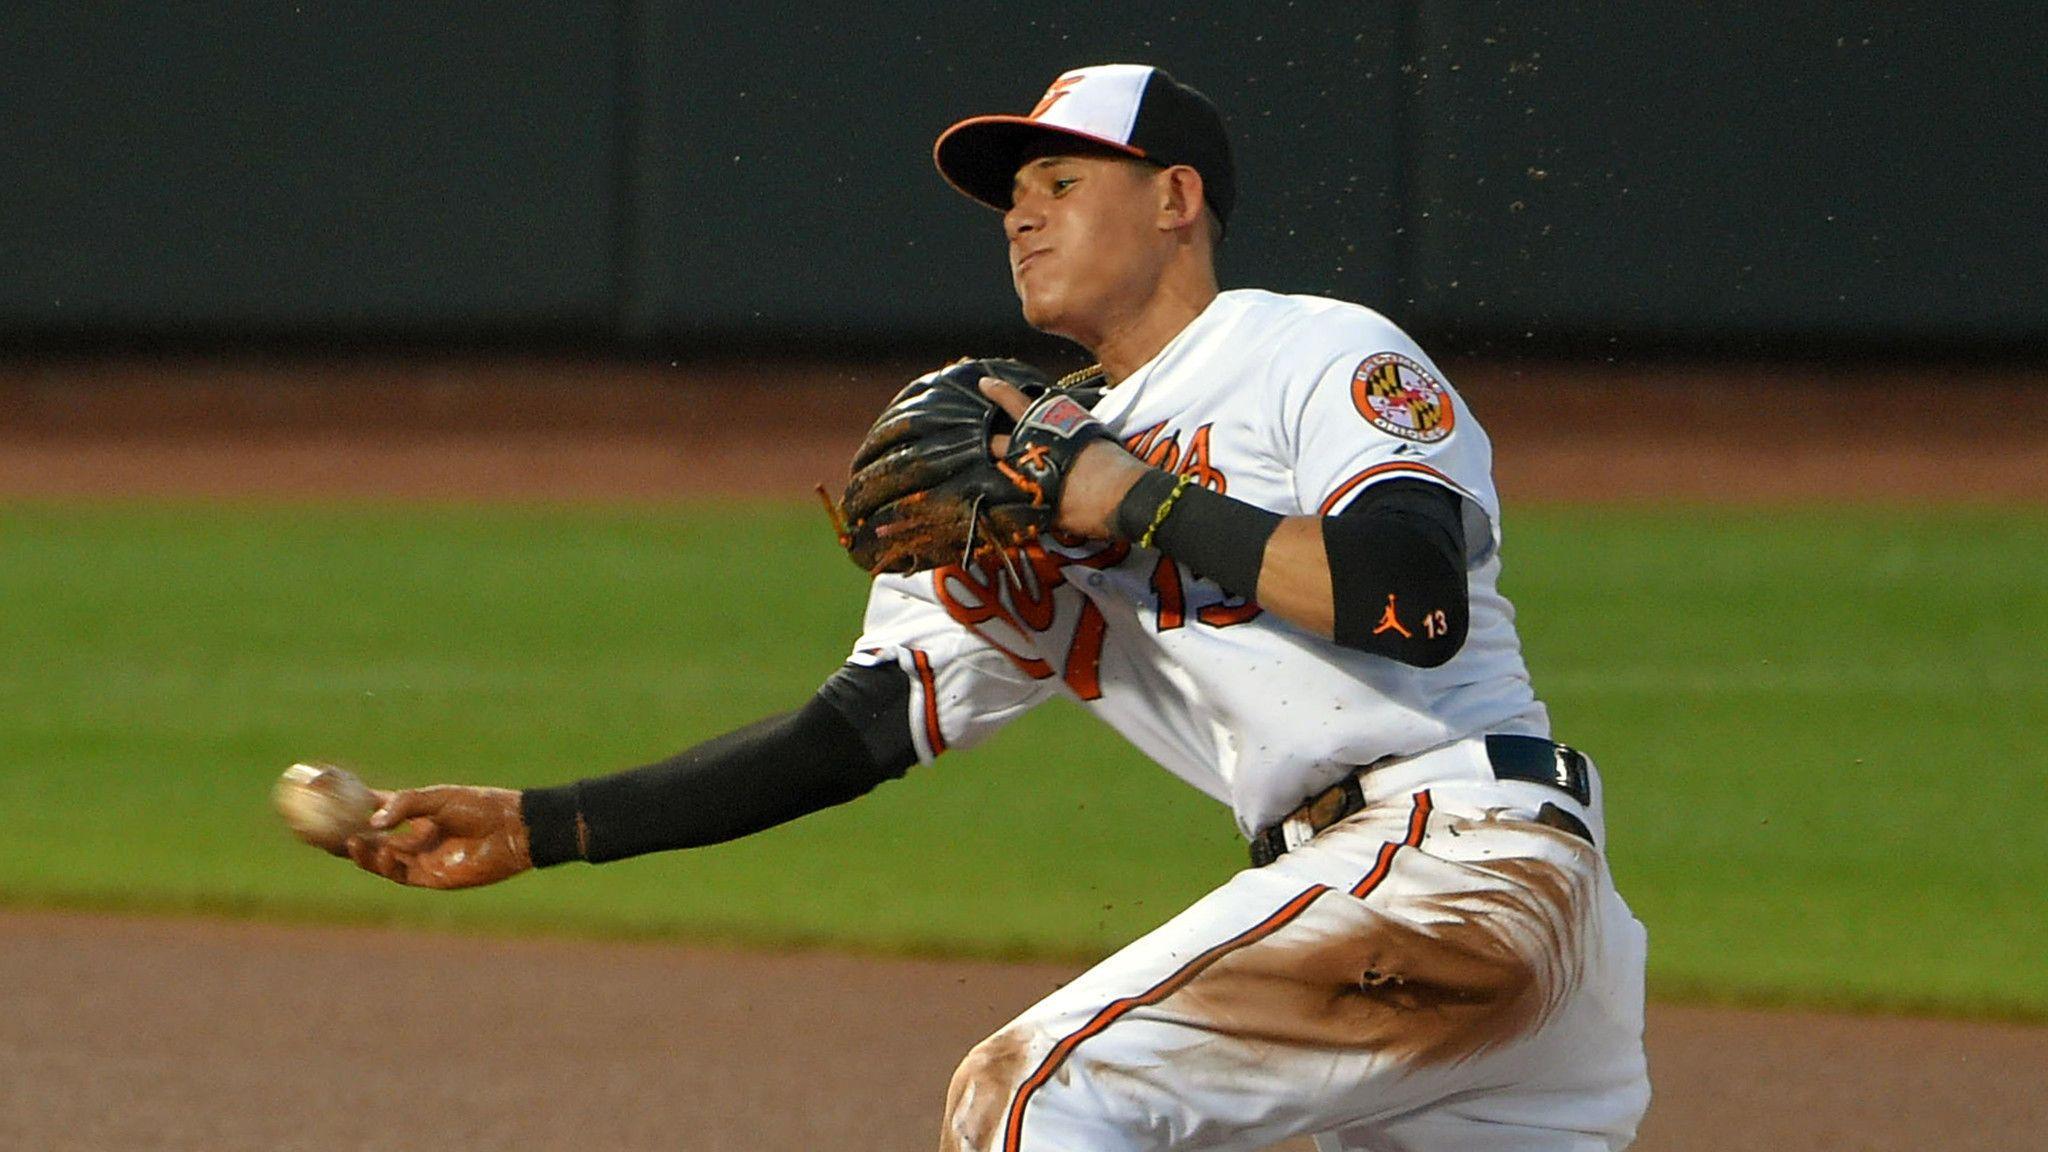 Observations on Orioles third baseman Manny Machado and his second